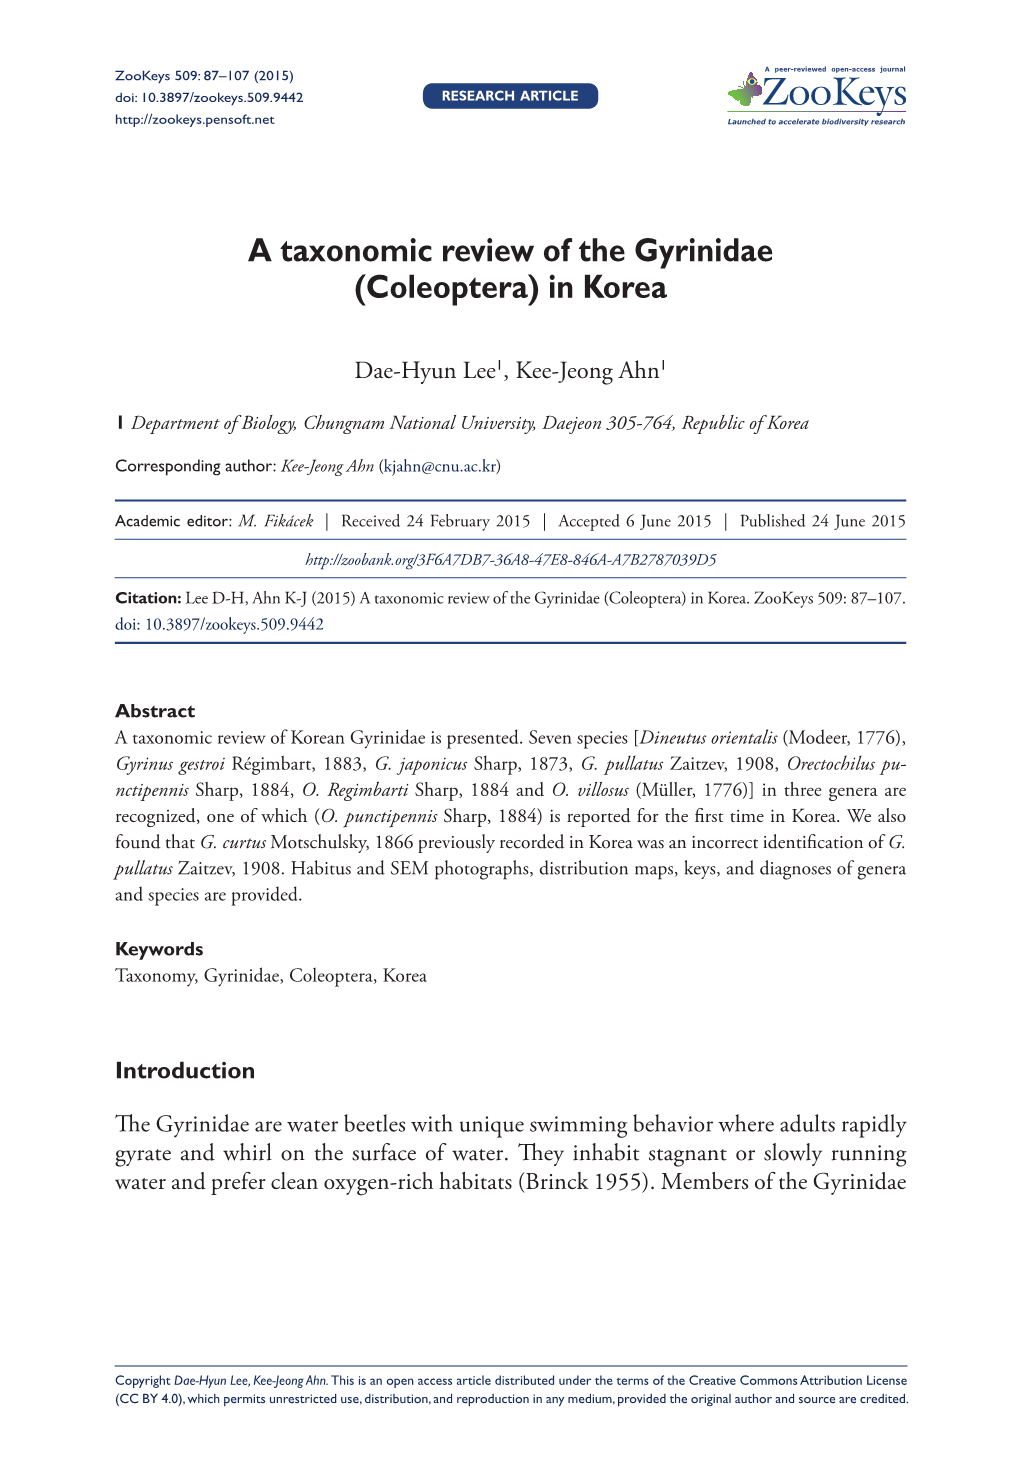 A Taxonomic Review of the Gyrinidae (Coleoptera)